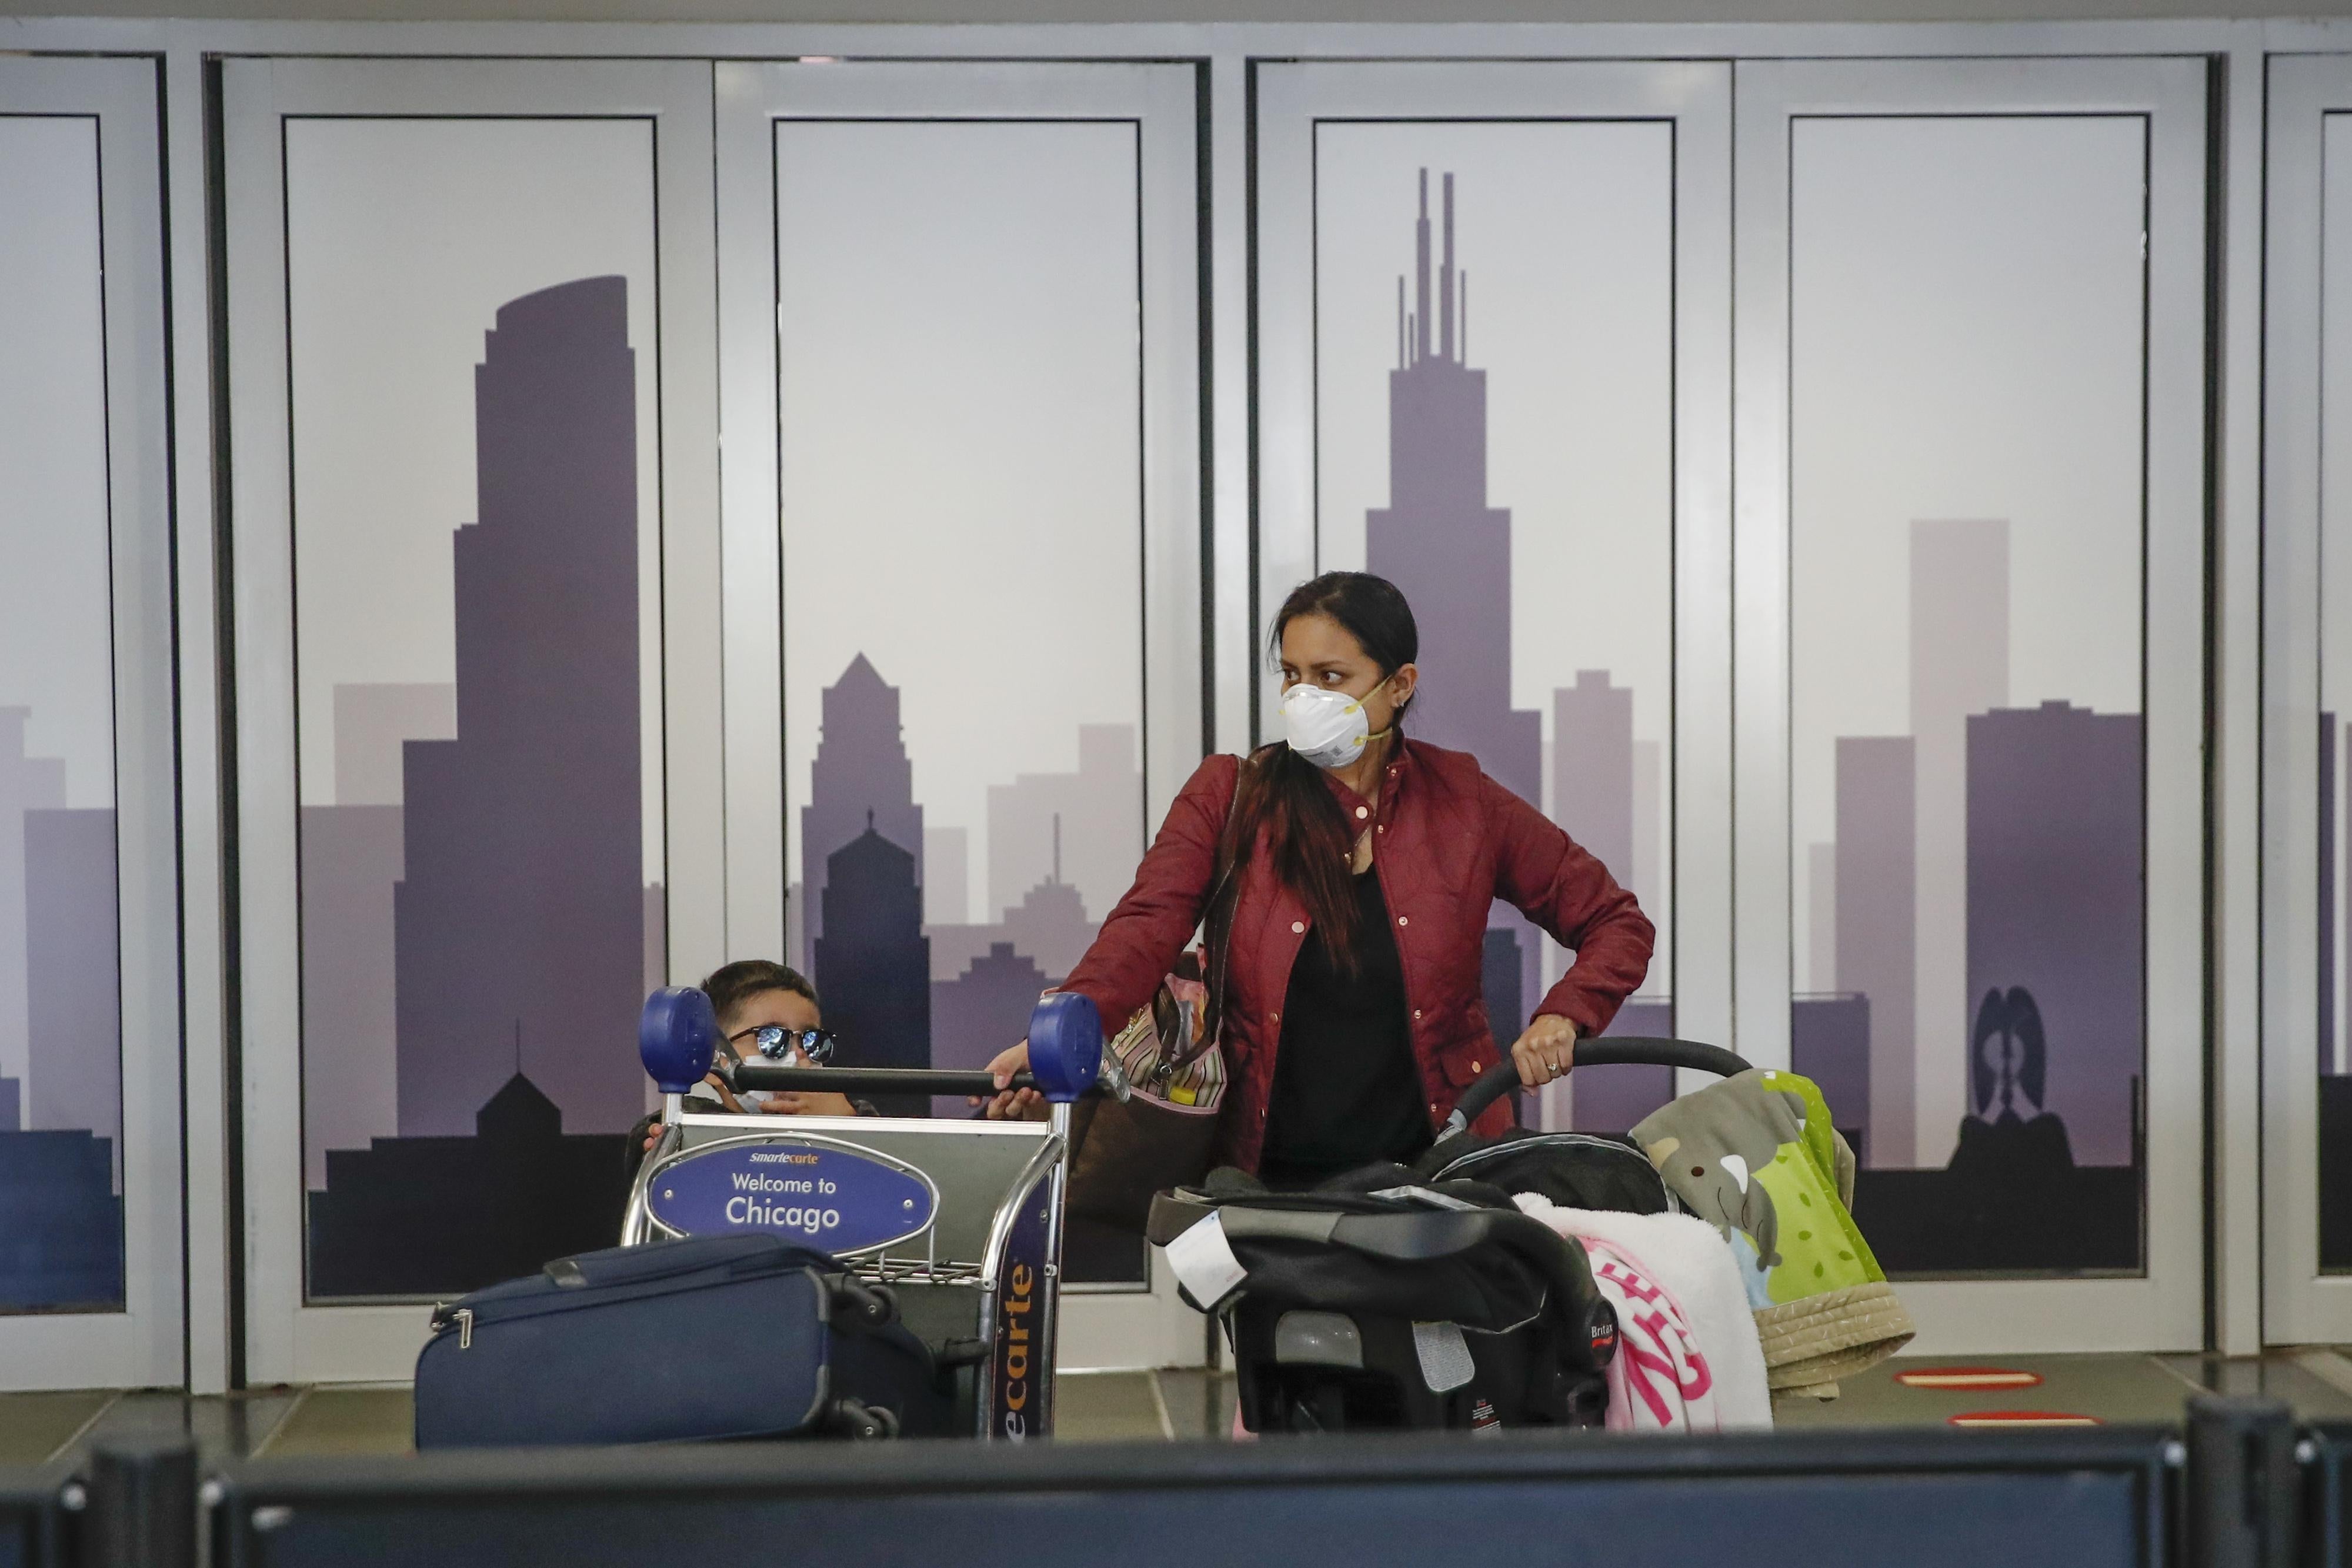 Travelers arrive at the international terminal of the O'Hare Airport in Chicago, Illinois, on March 13, 2020.